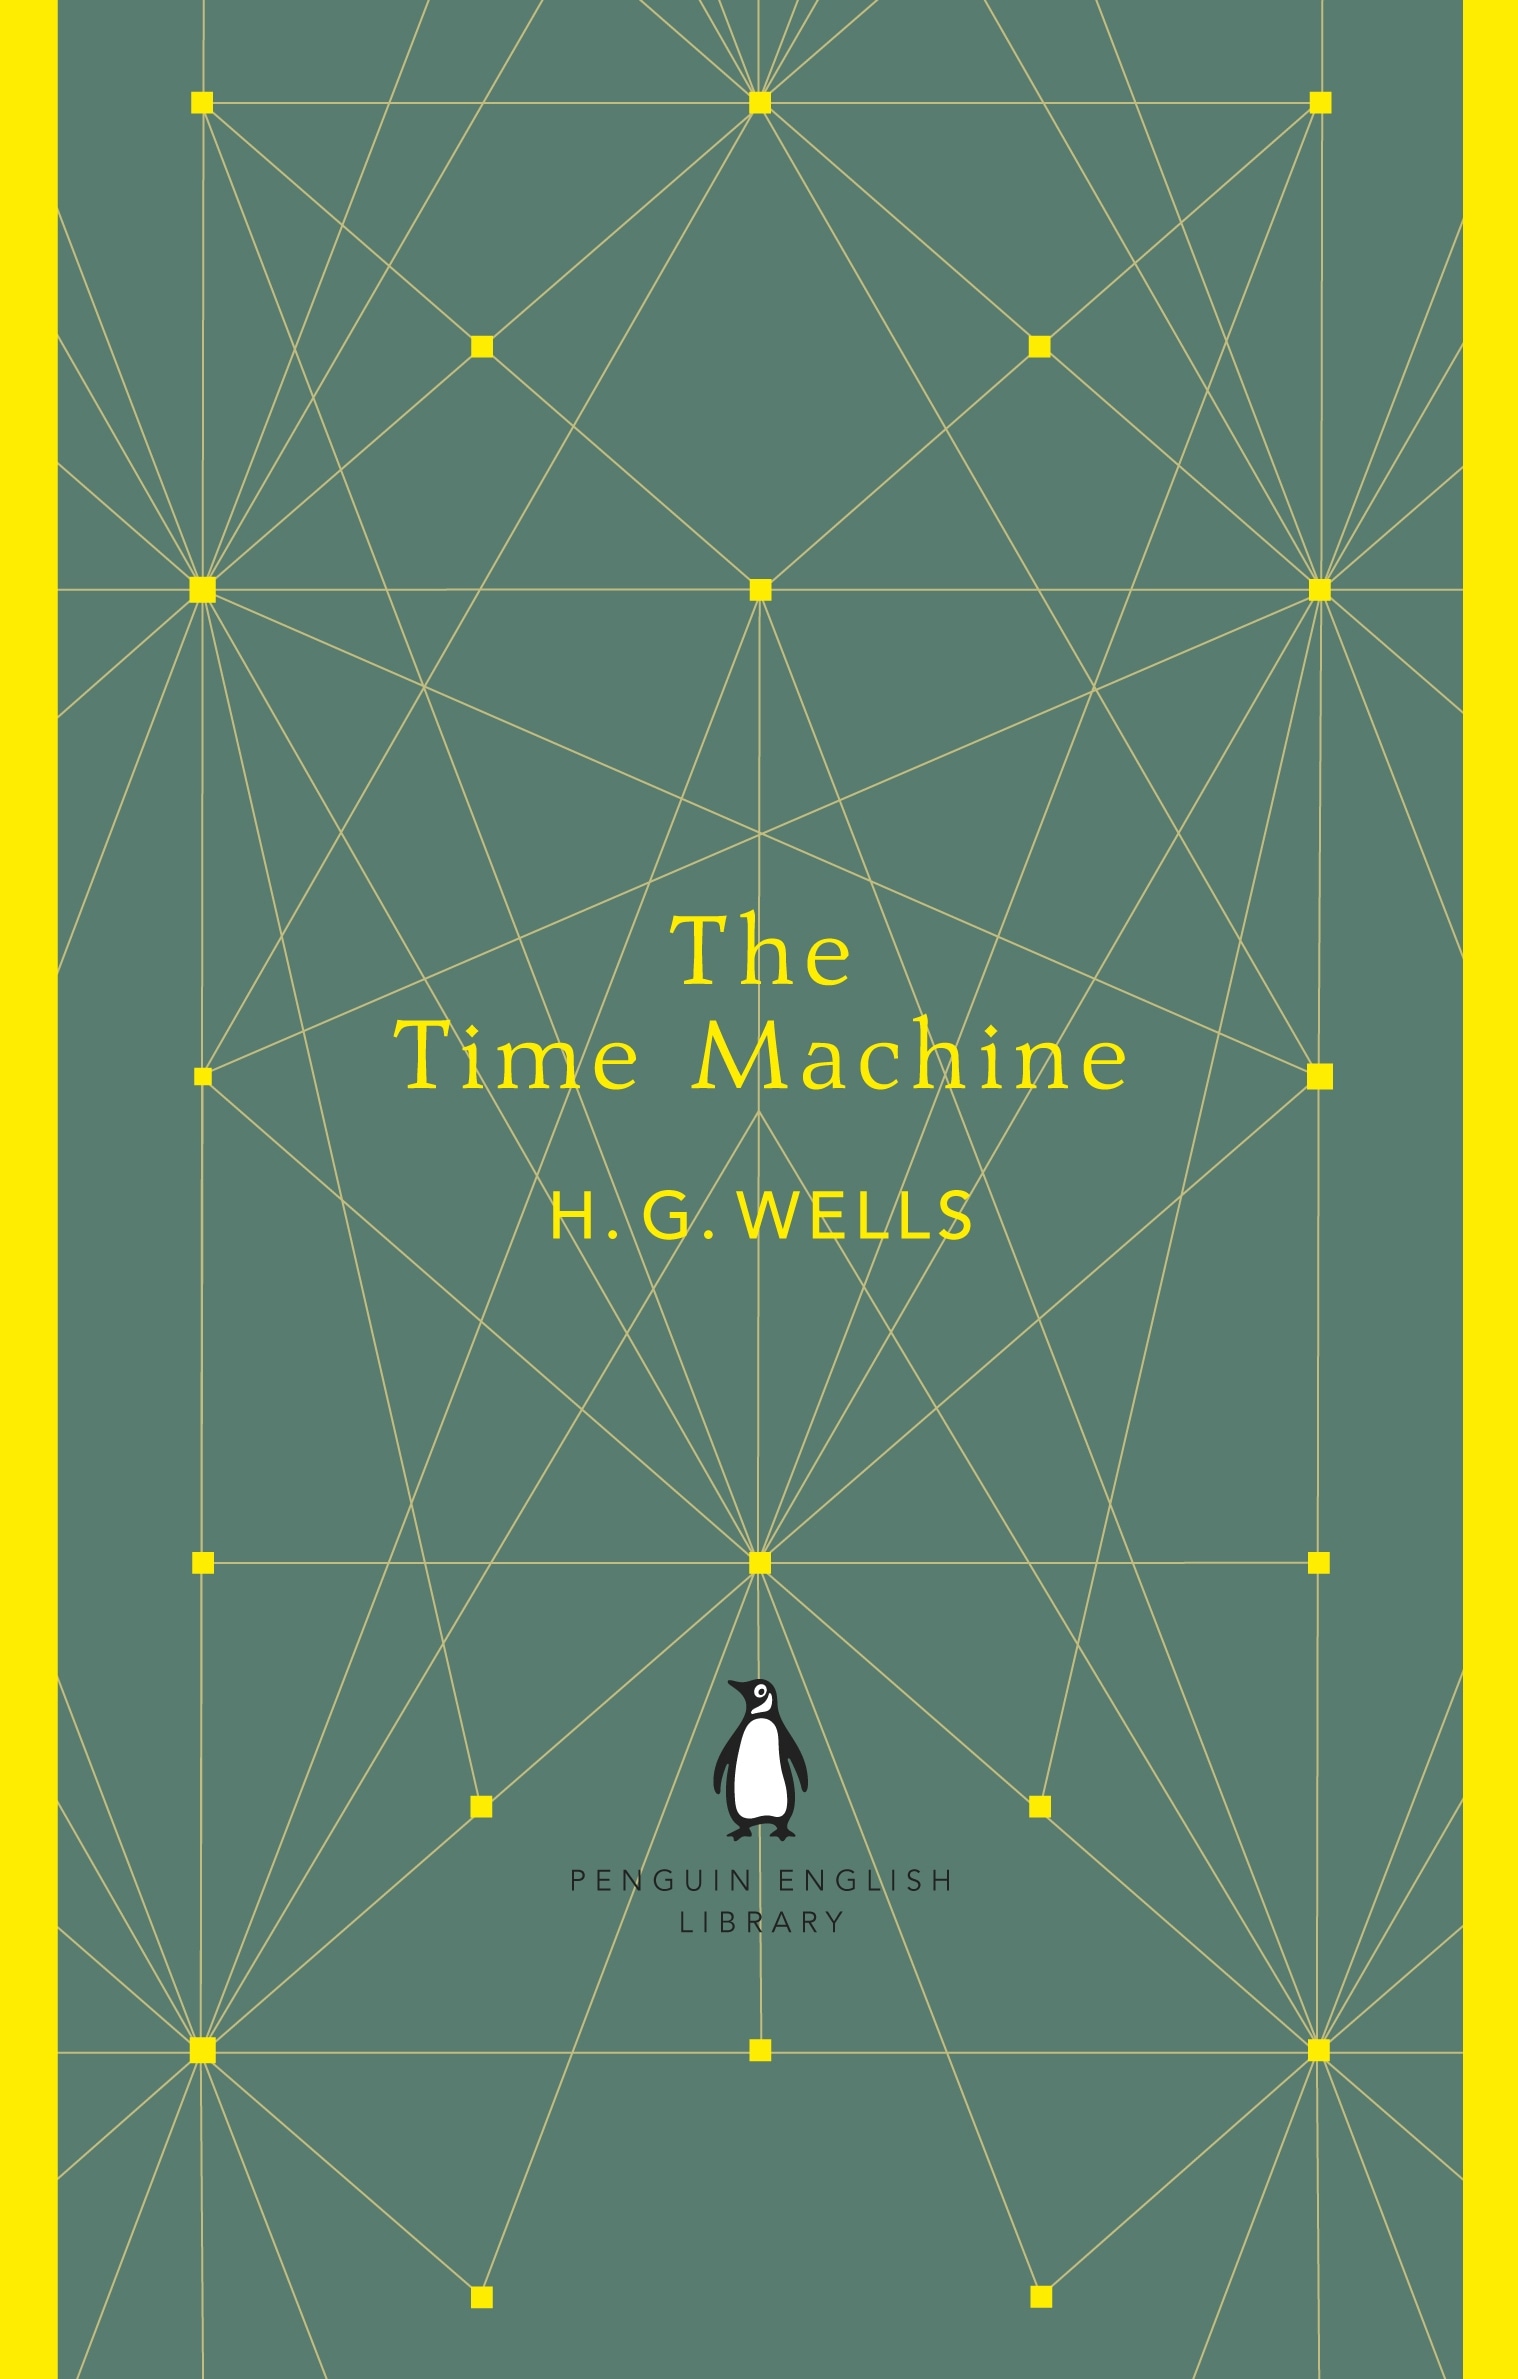 Book “The Time Machine” by H G Wells — May 31, 2012